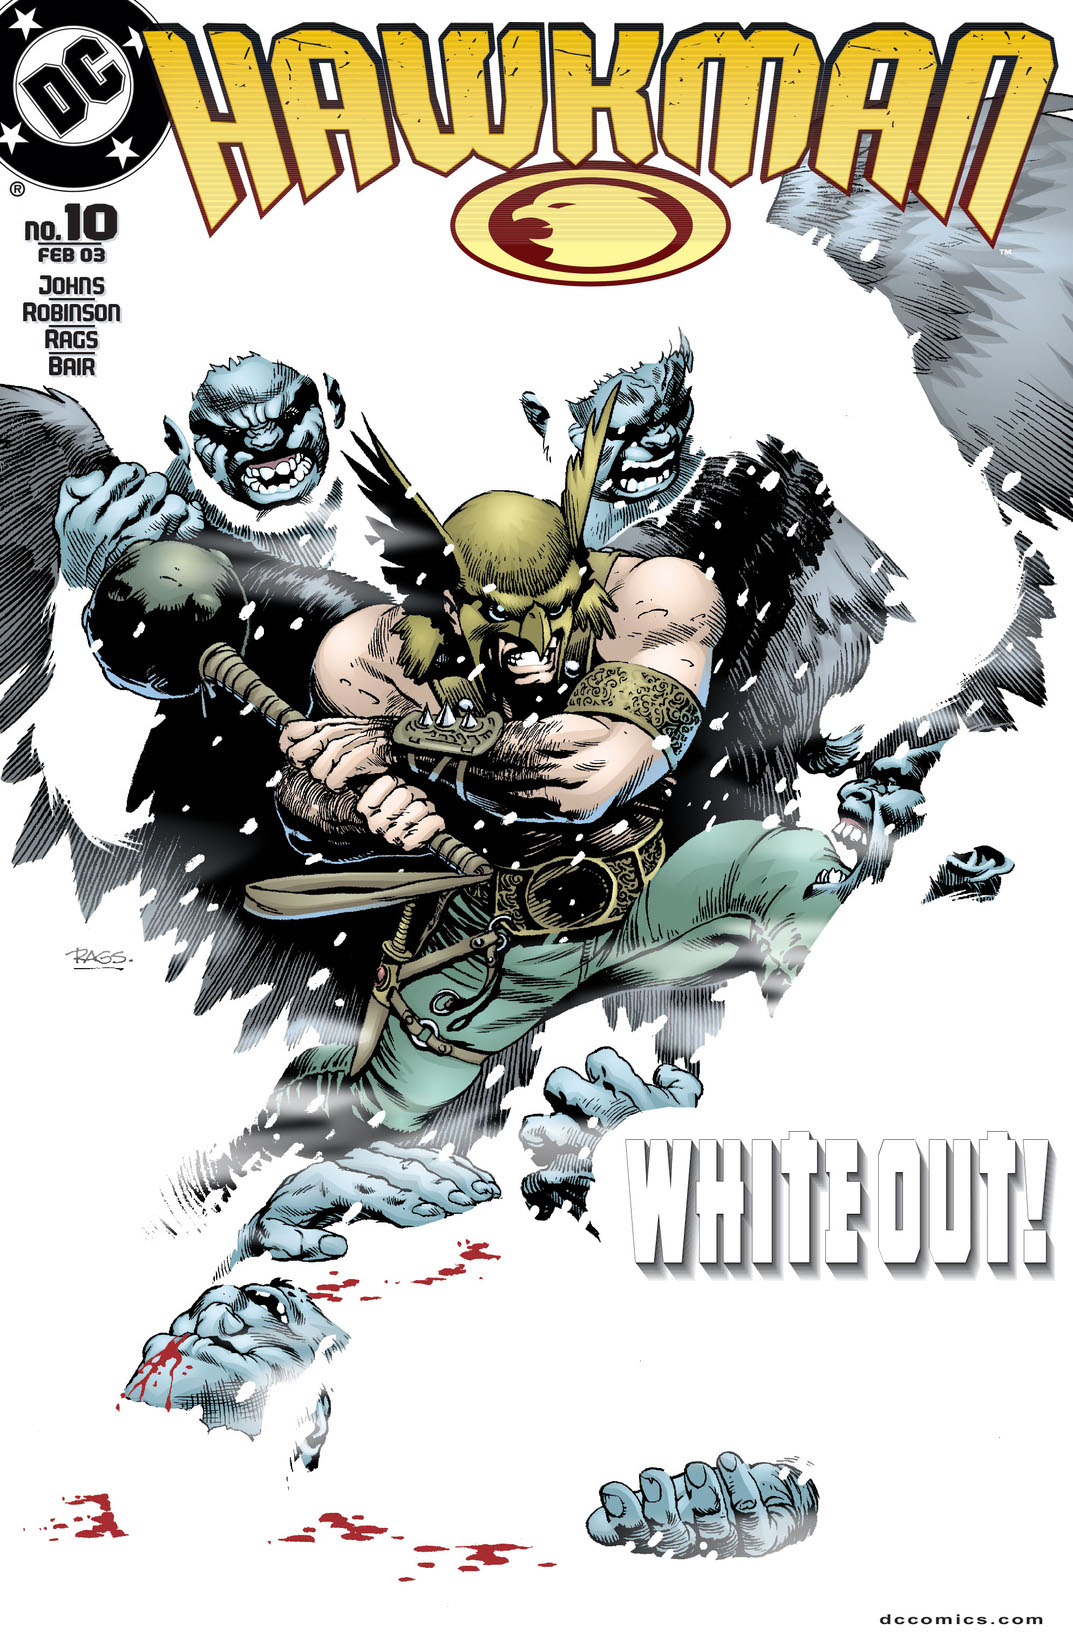 Hawkman (2002-) #10 preview images